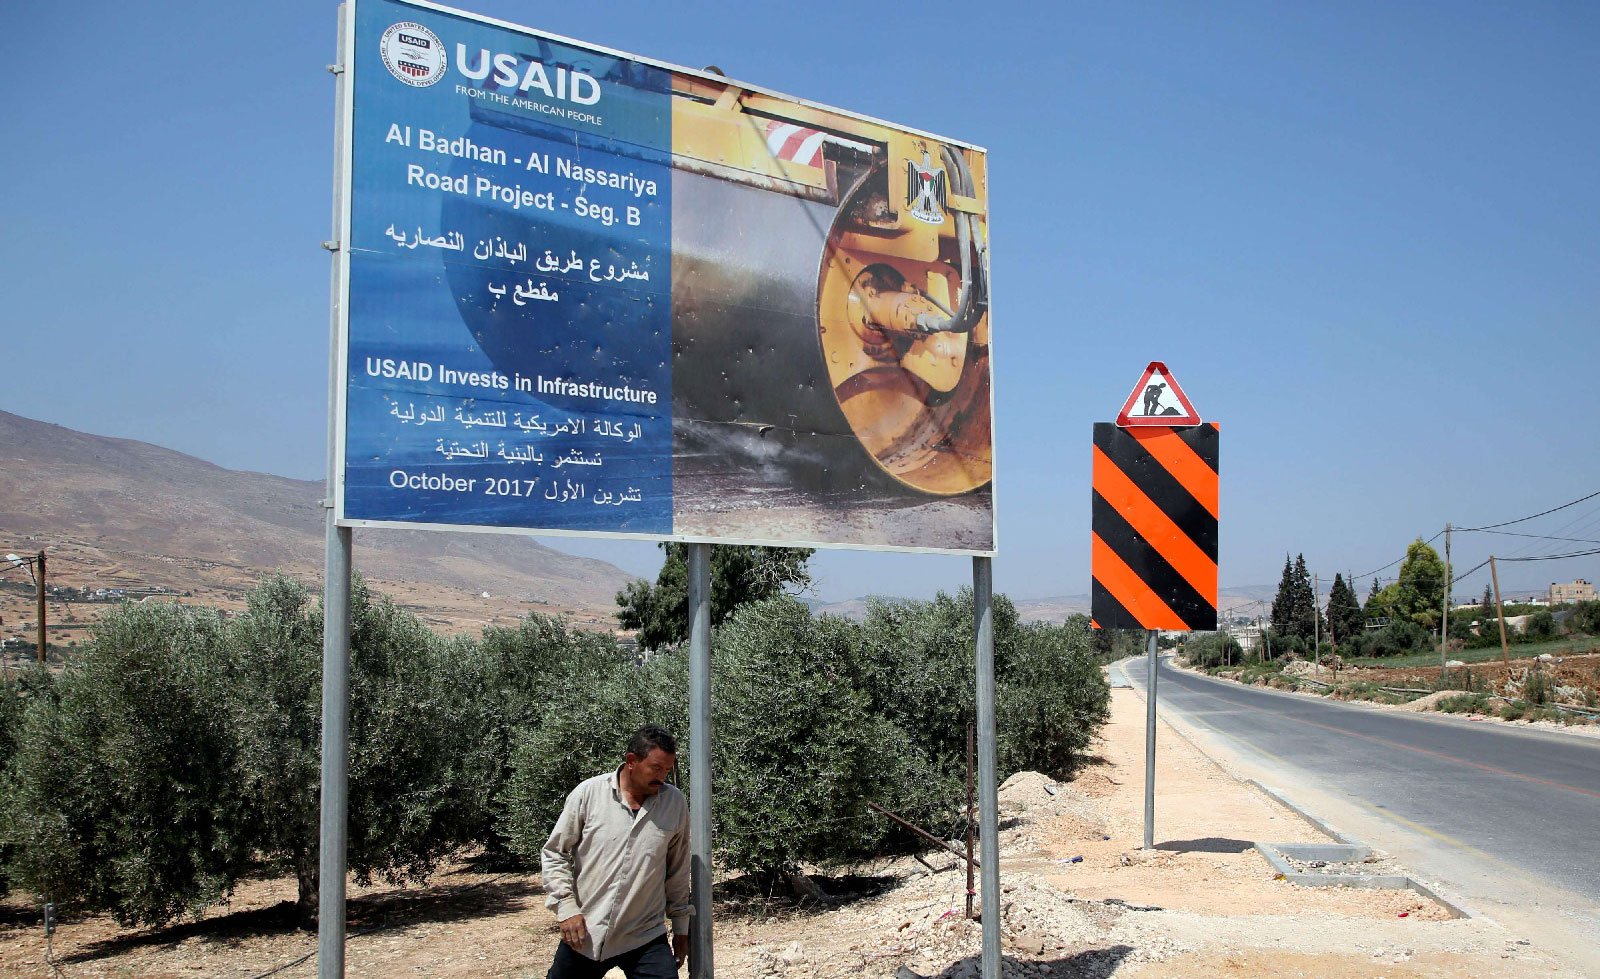 A Palestinian man walks near a USAID billboard in the village of al-Badhan, north of Nablus in the occupied West Bank on August 25, 2018.